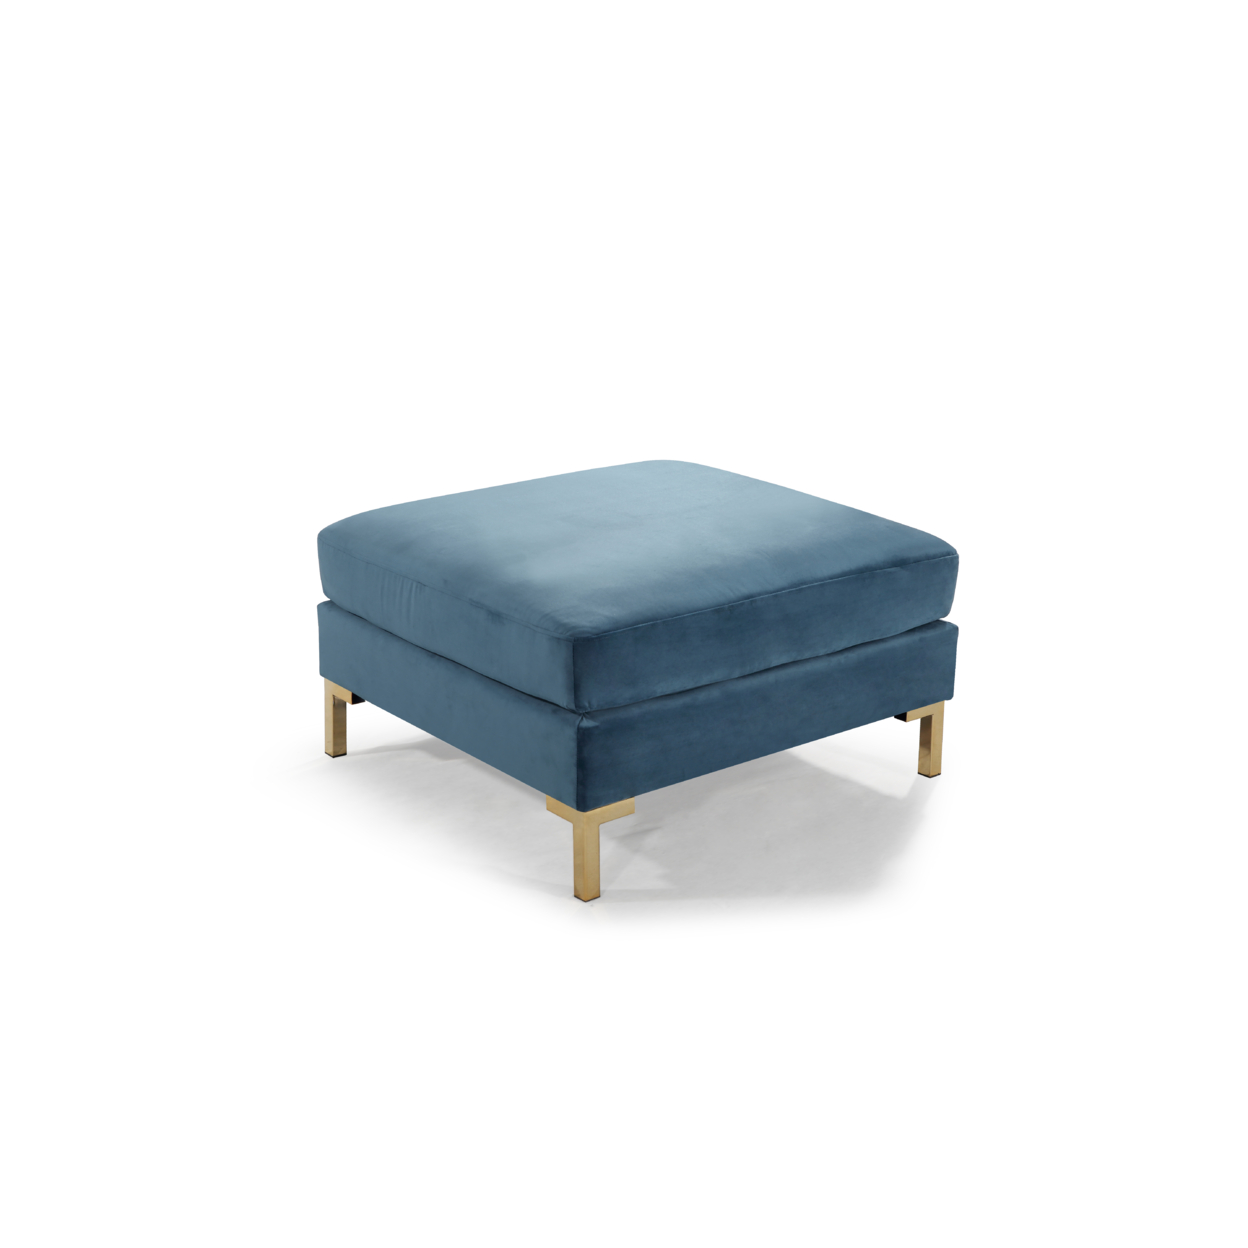 Greco Modular Chaise Ottoman Coffee Table Cushion Bench Solid Gold Tone Metal Y-Leg - Teal